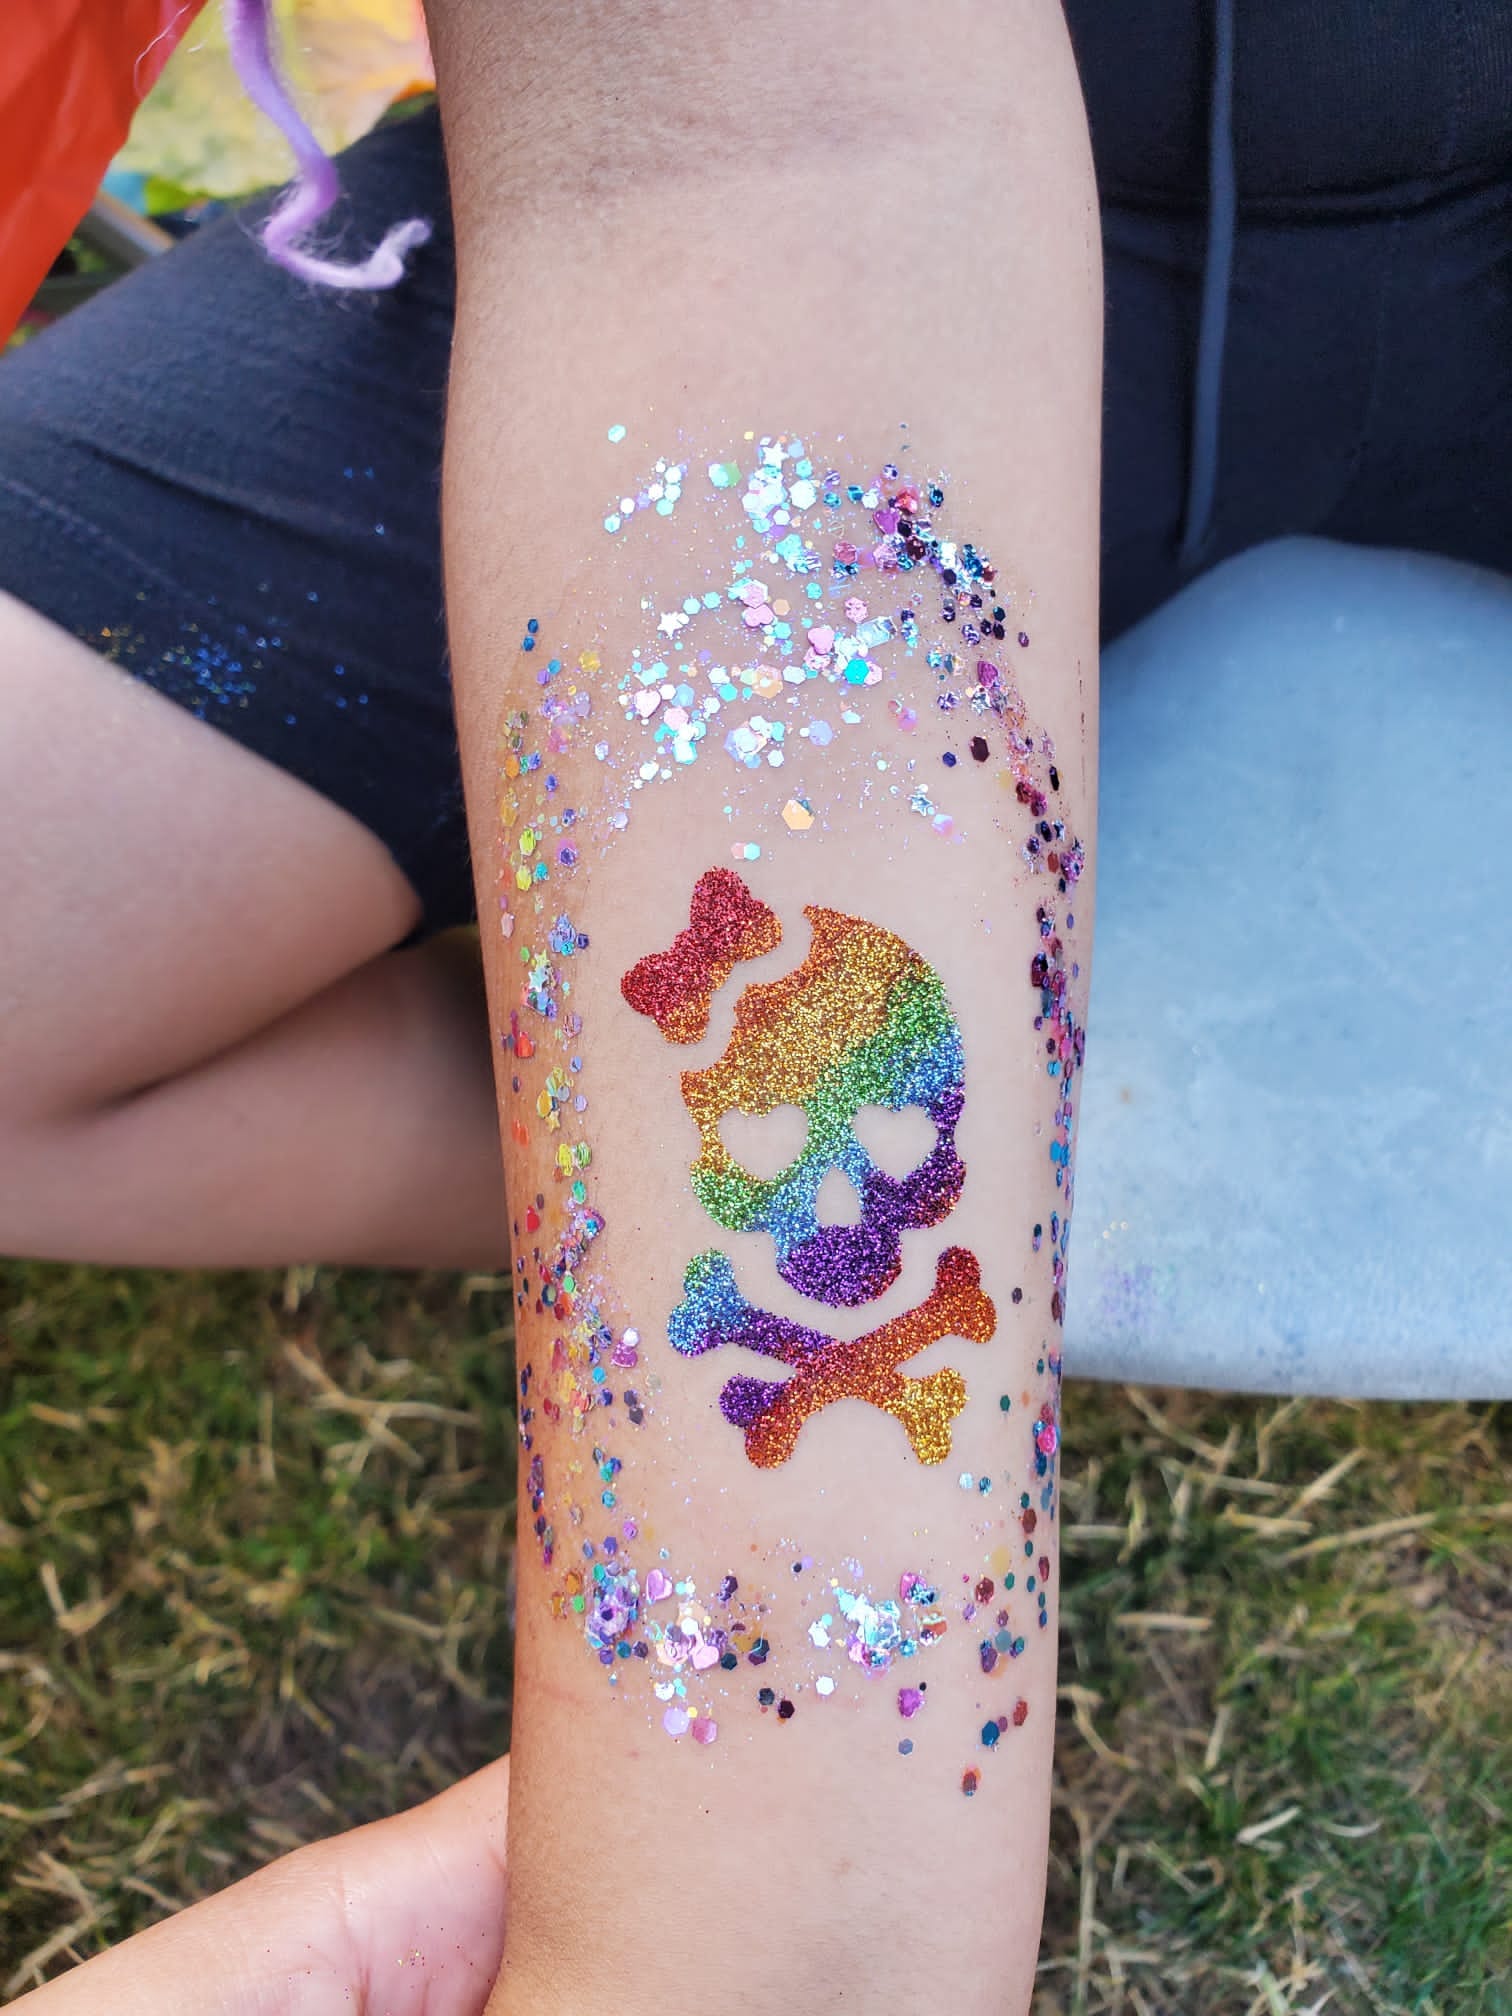 a person's arm covered in glitter with a skull and crossbone on it.